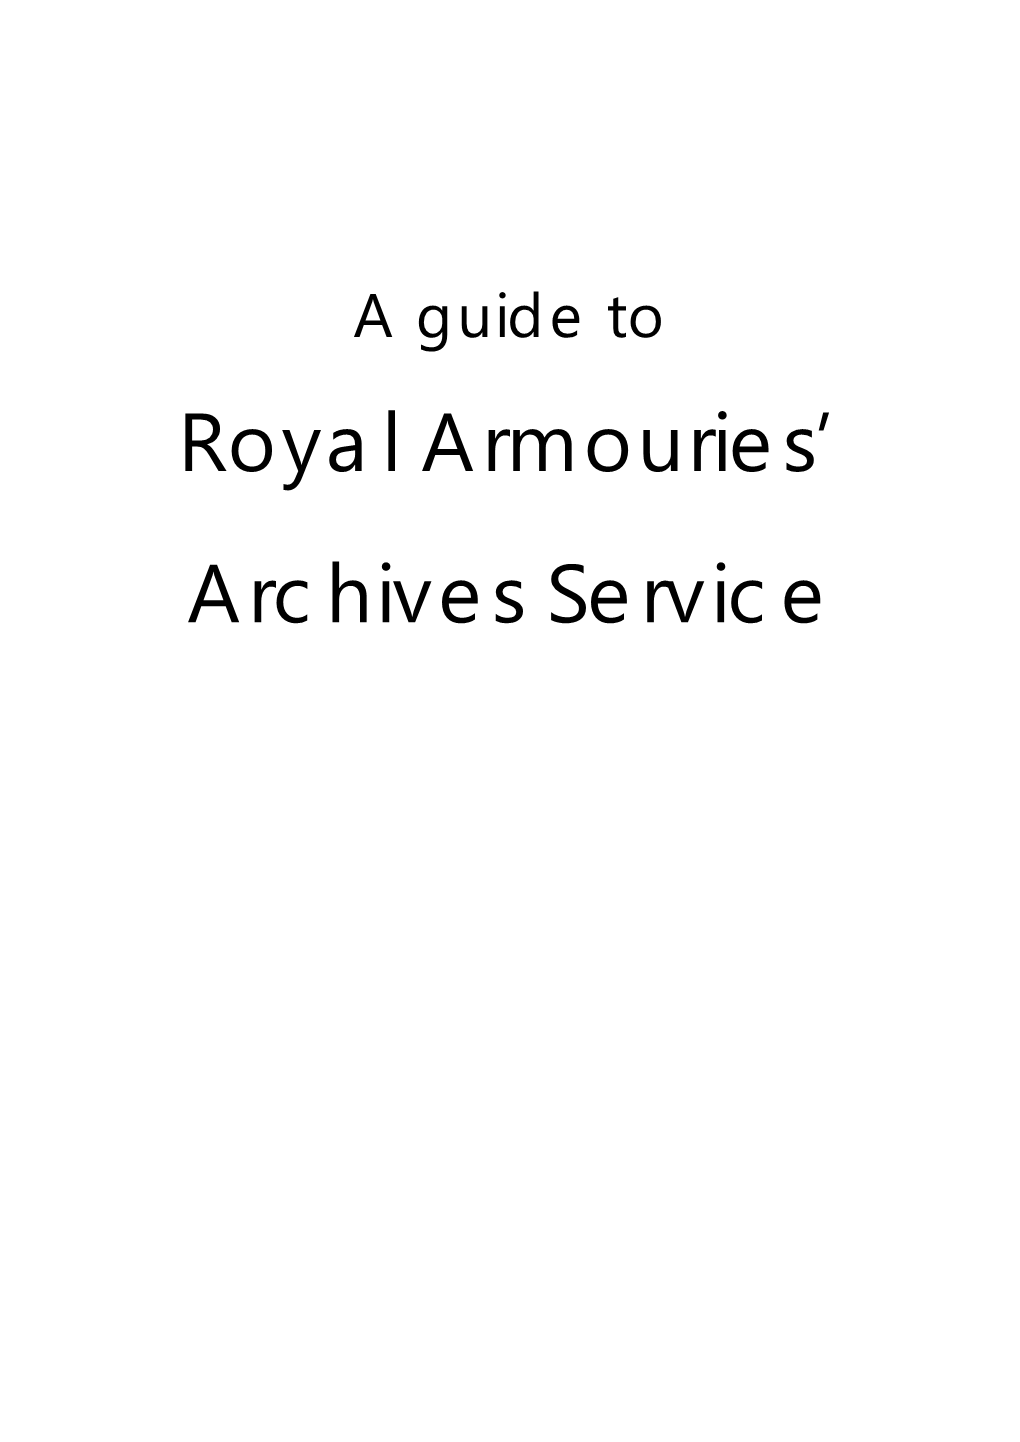 Royal Armouries' Archives Service